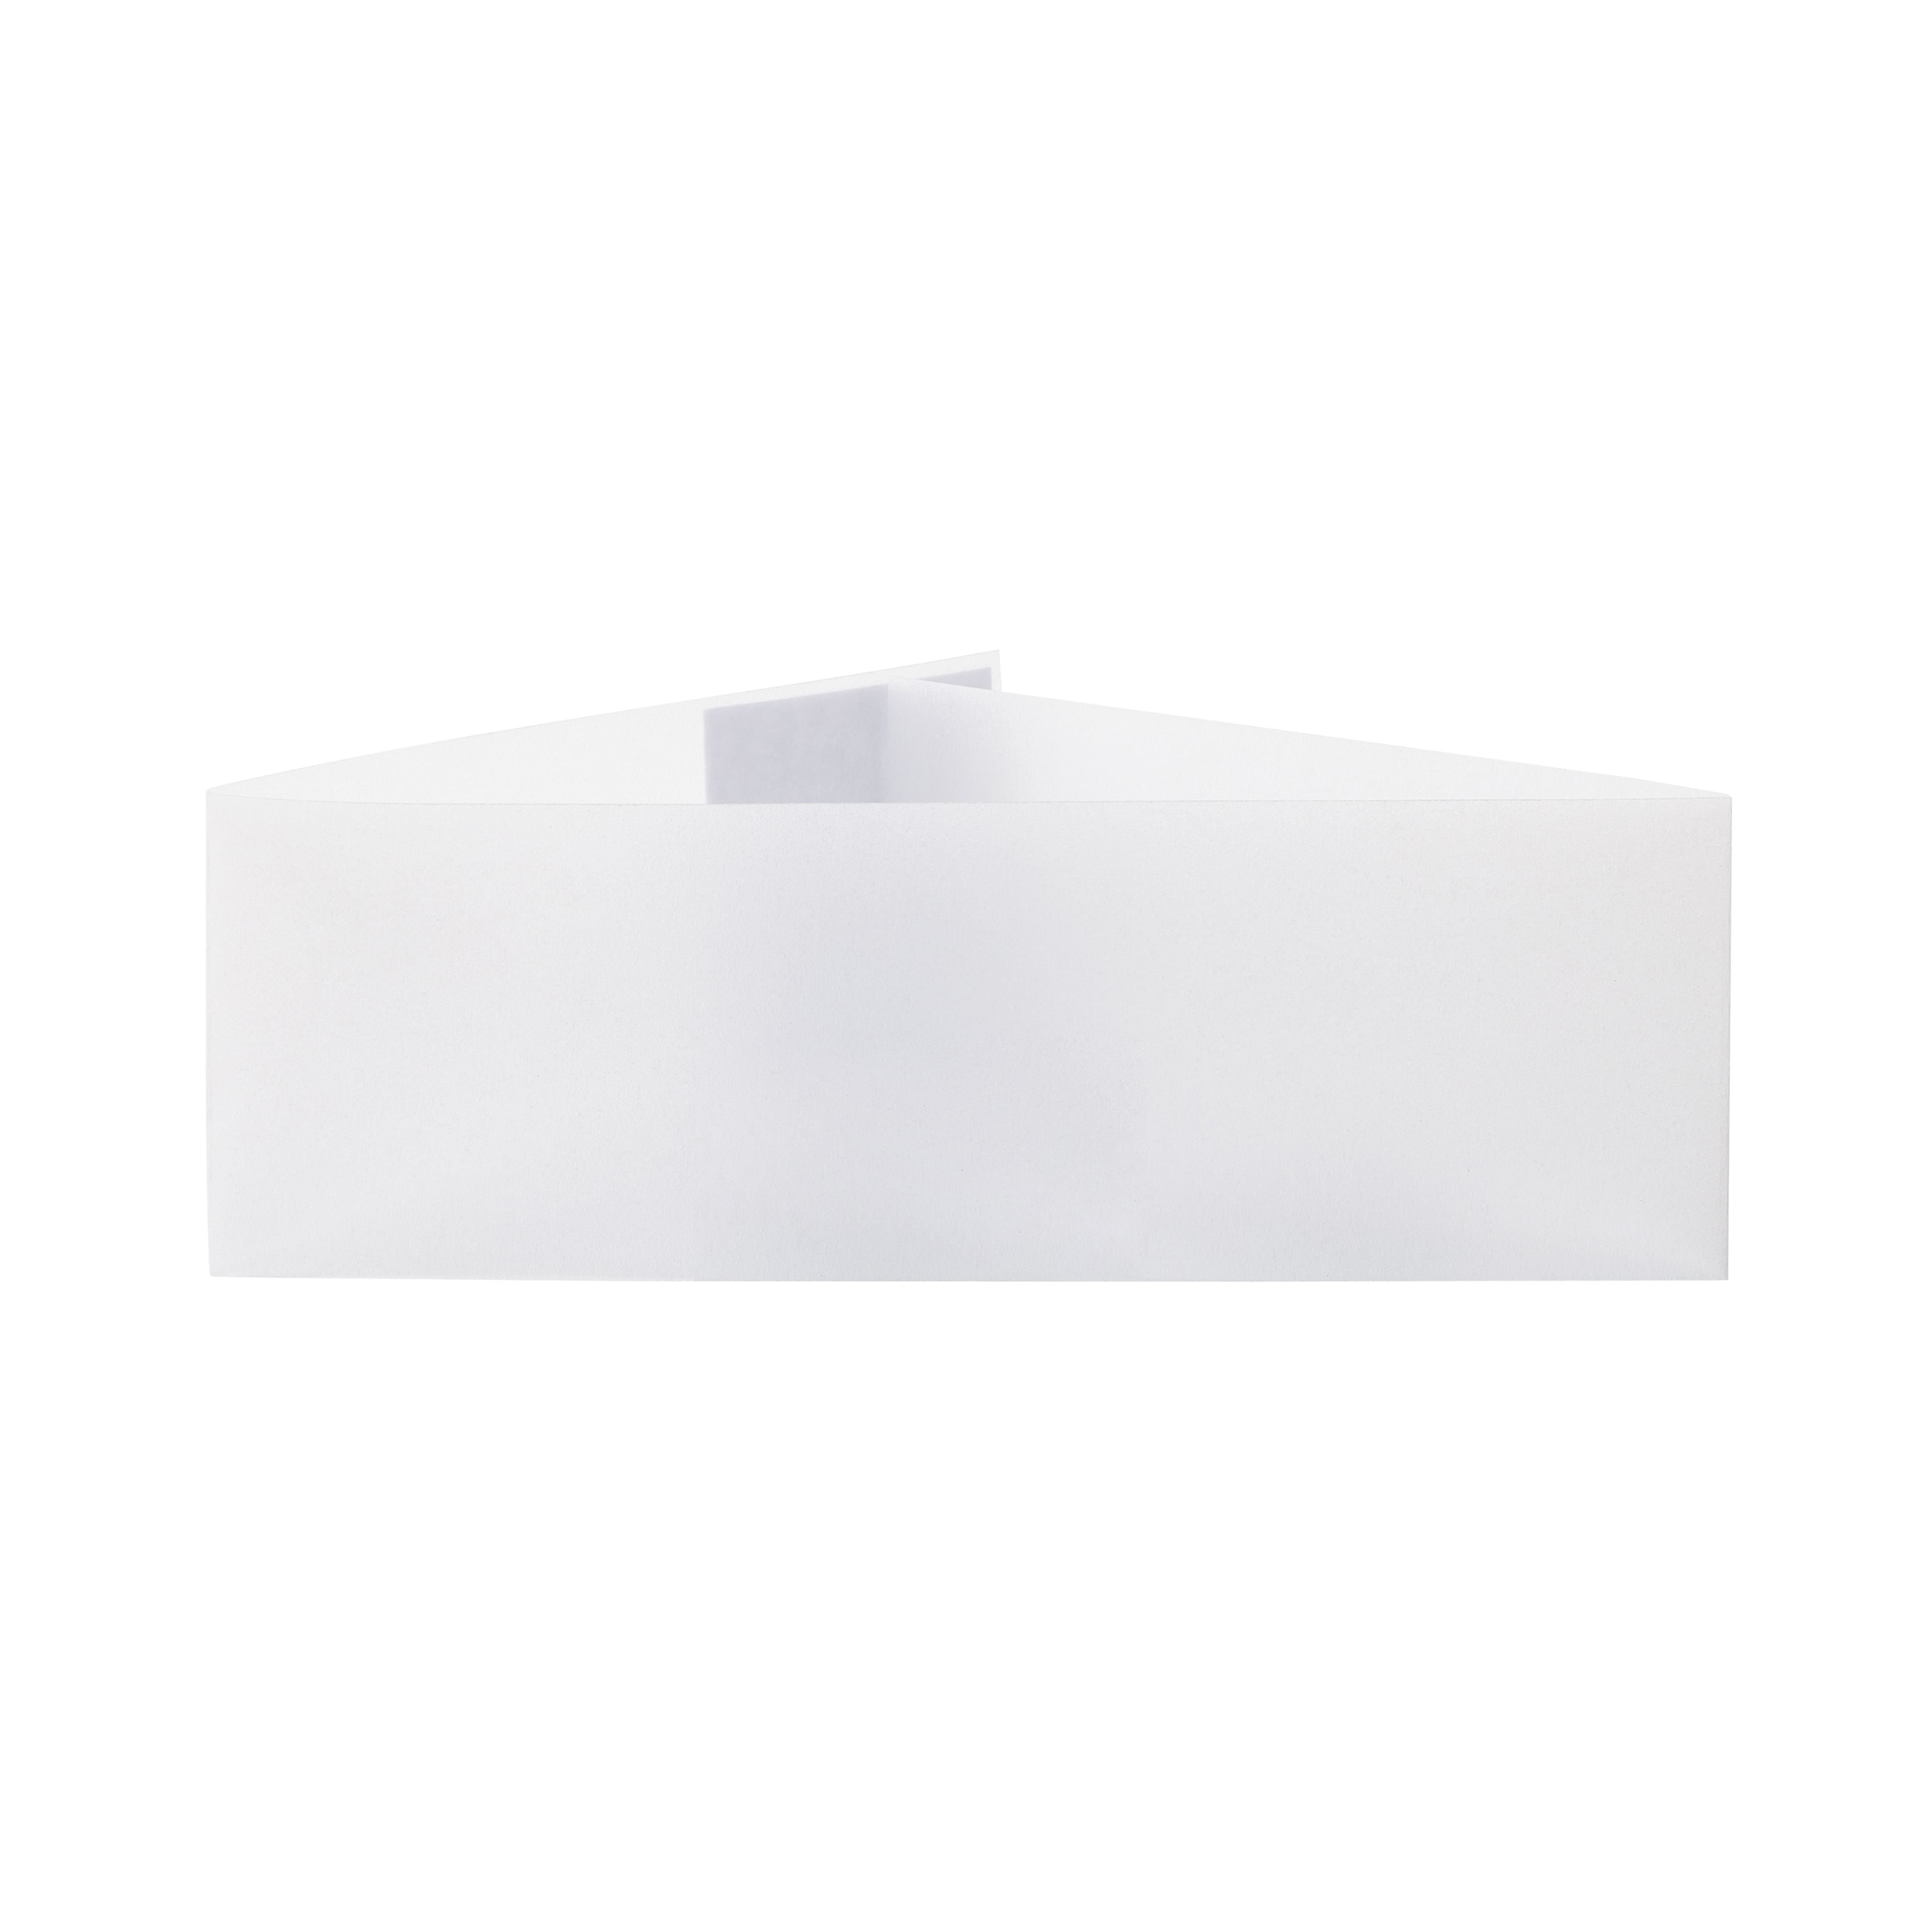 A2 White Vellum Belly Bands by Recollections&#x2122;, 10ct.